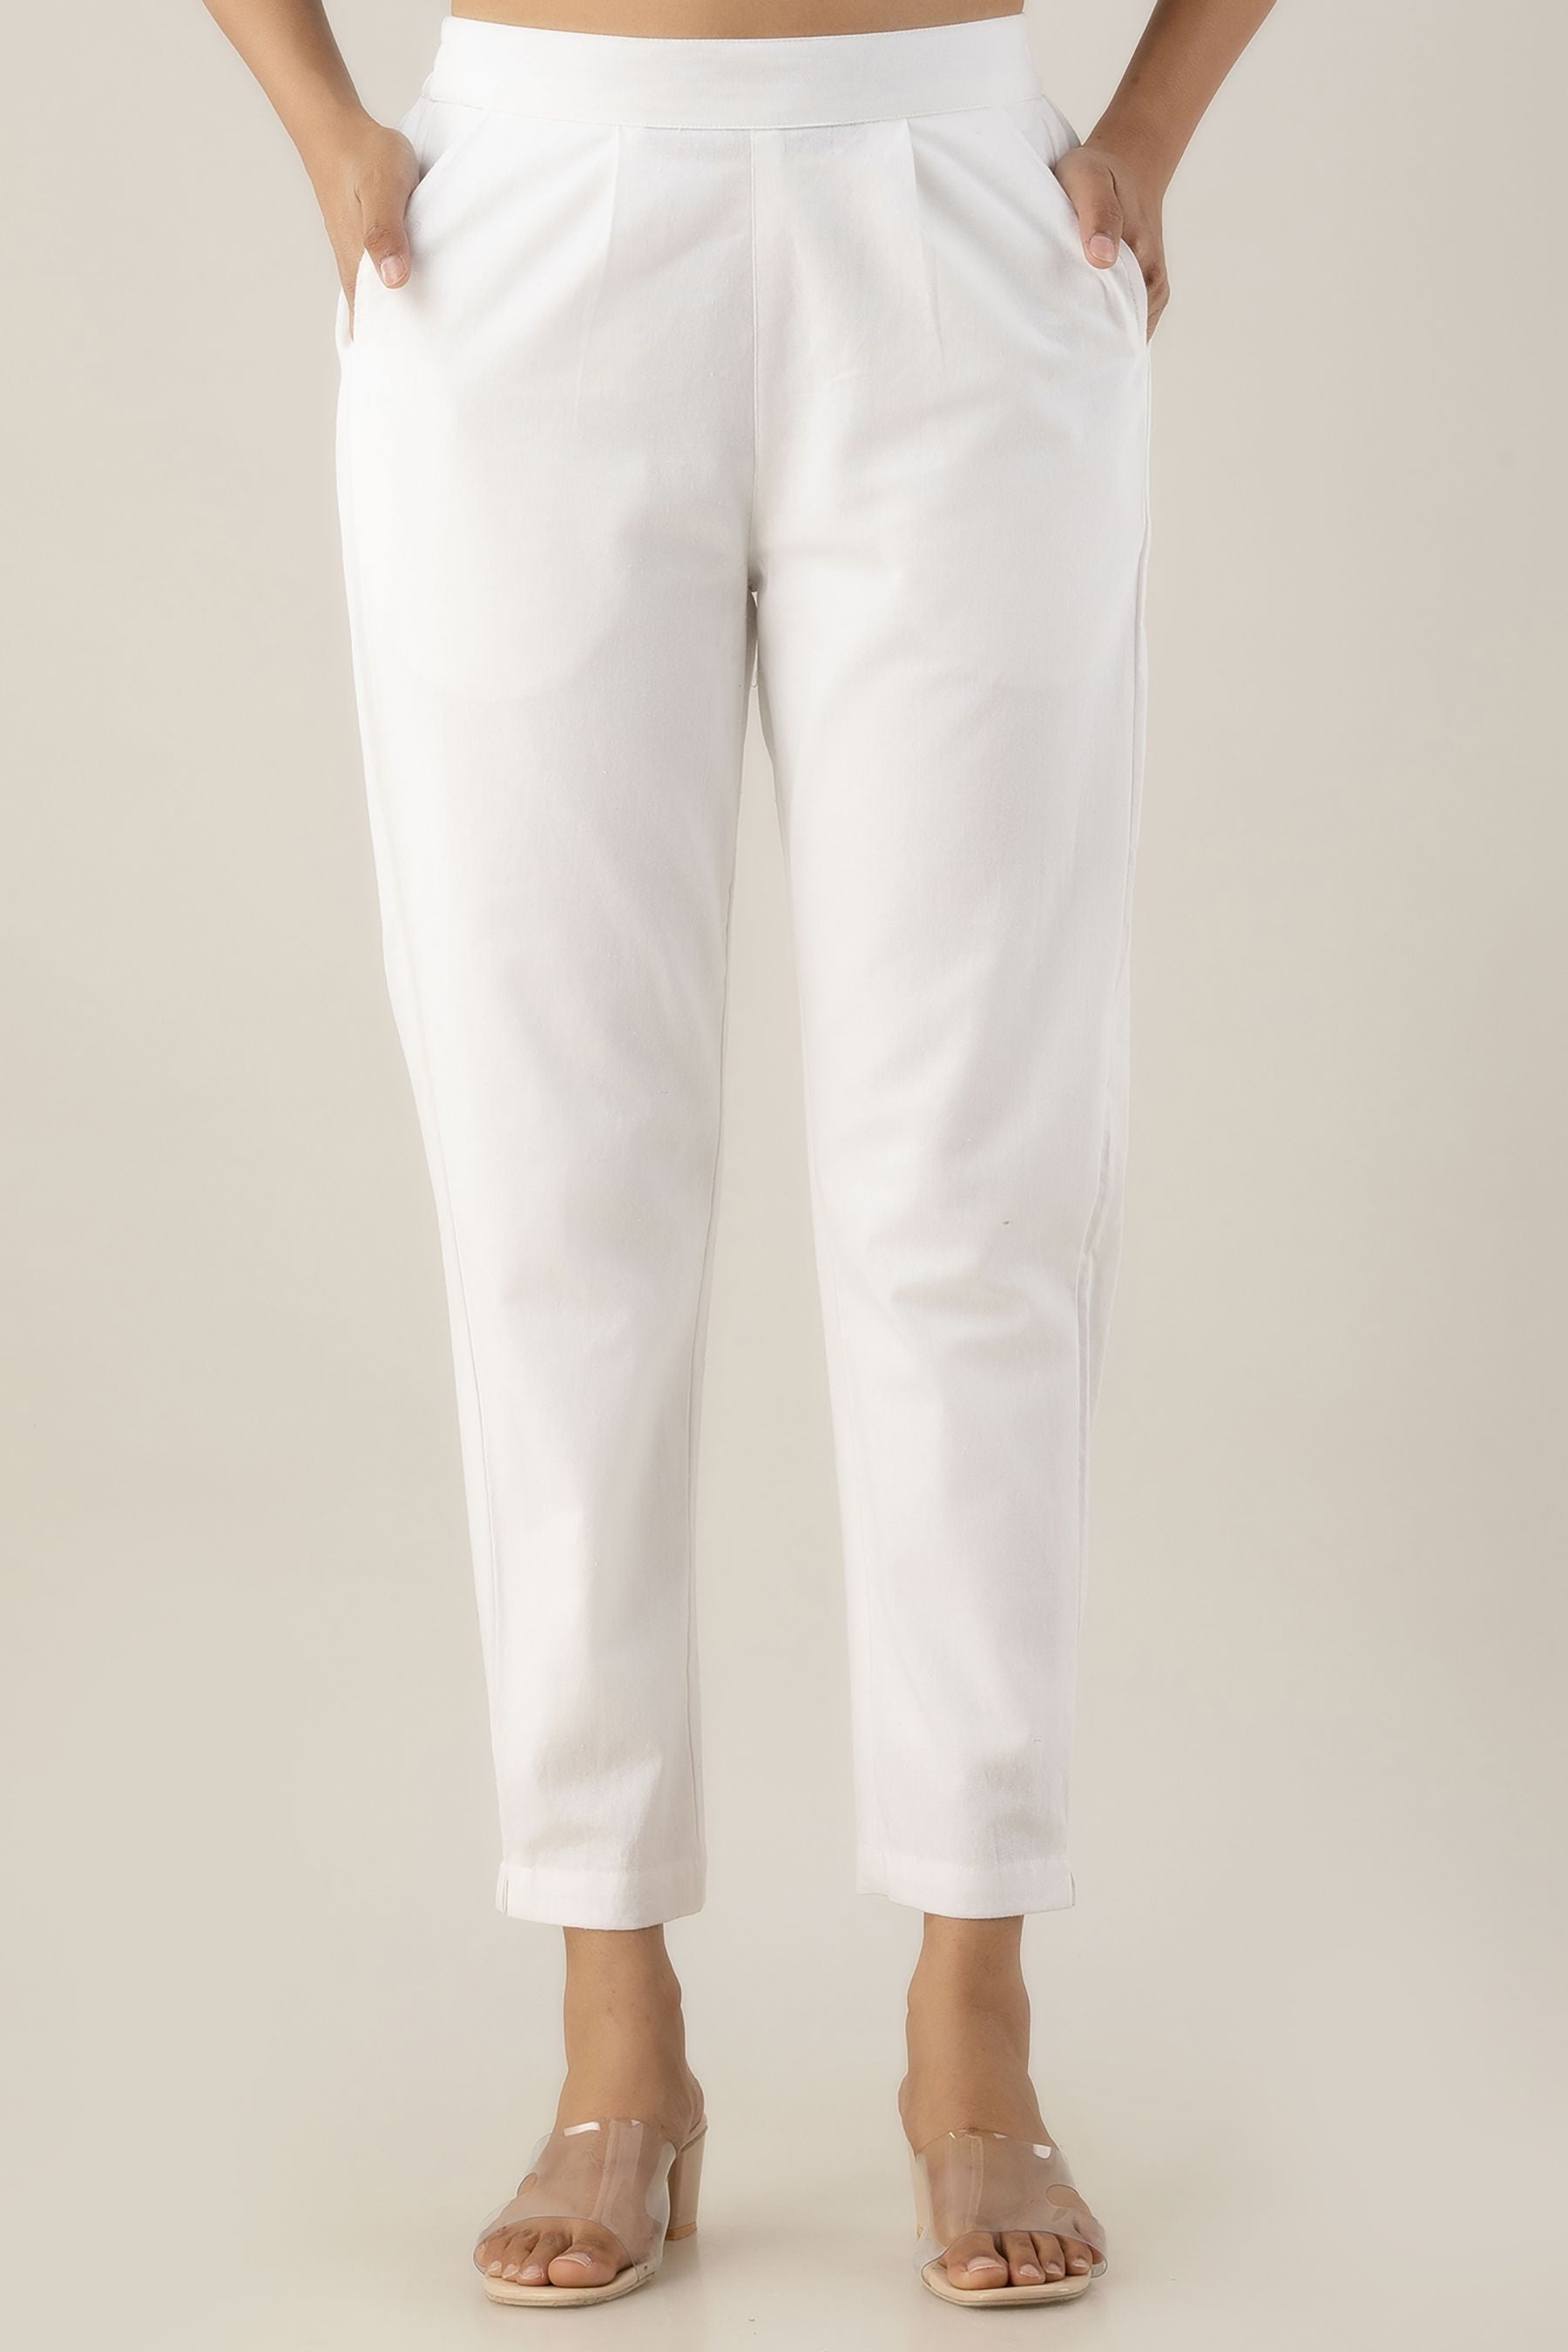 Stylish White Cigarette Trousers, Trousers For Women